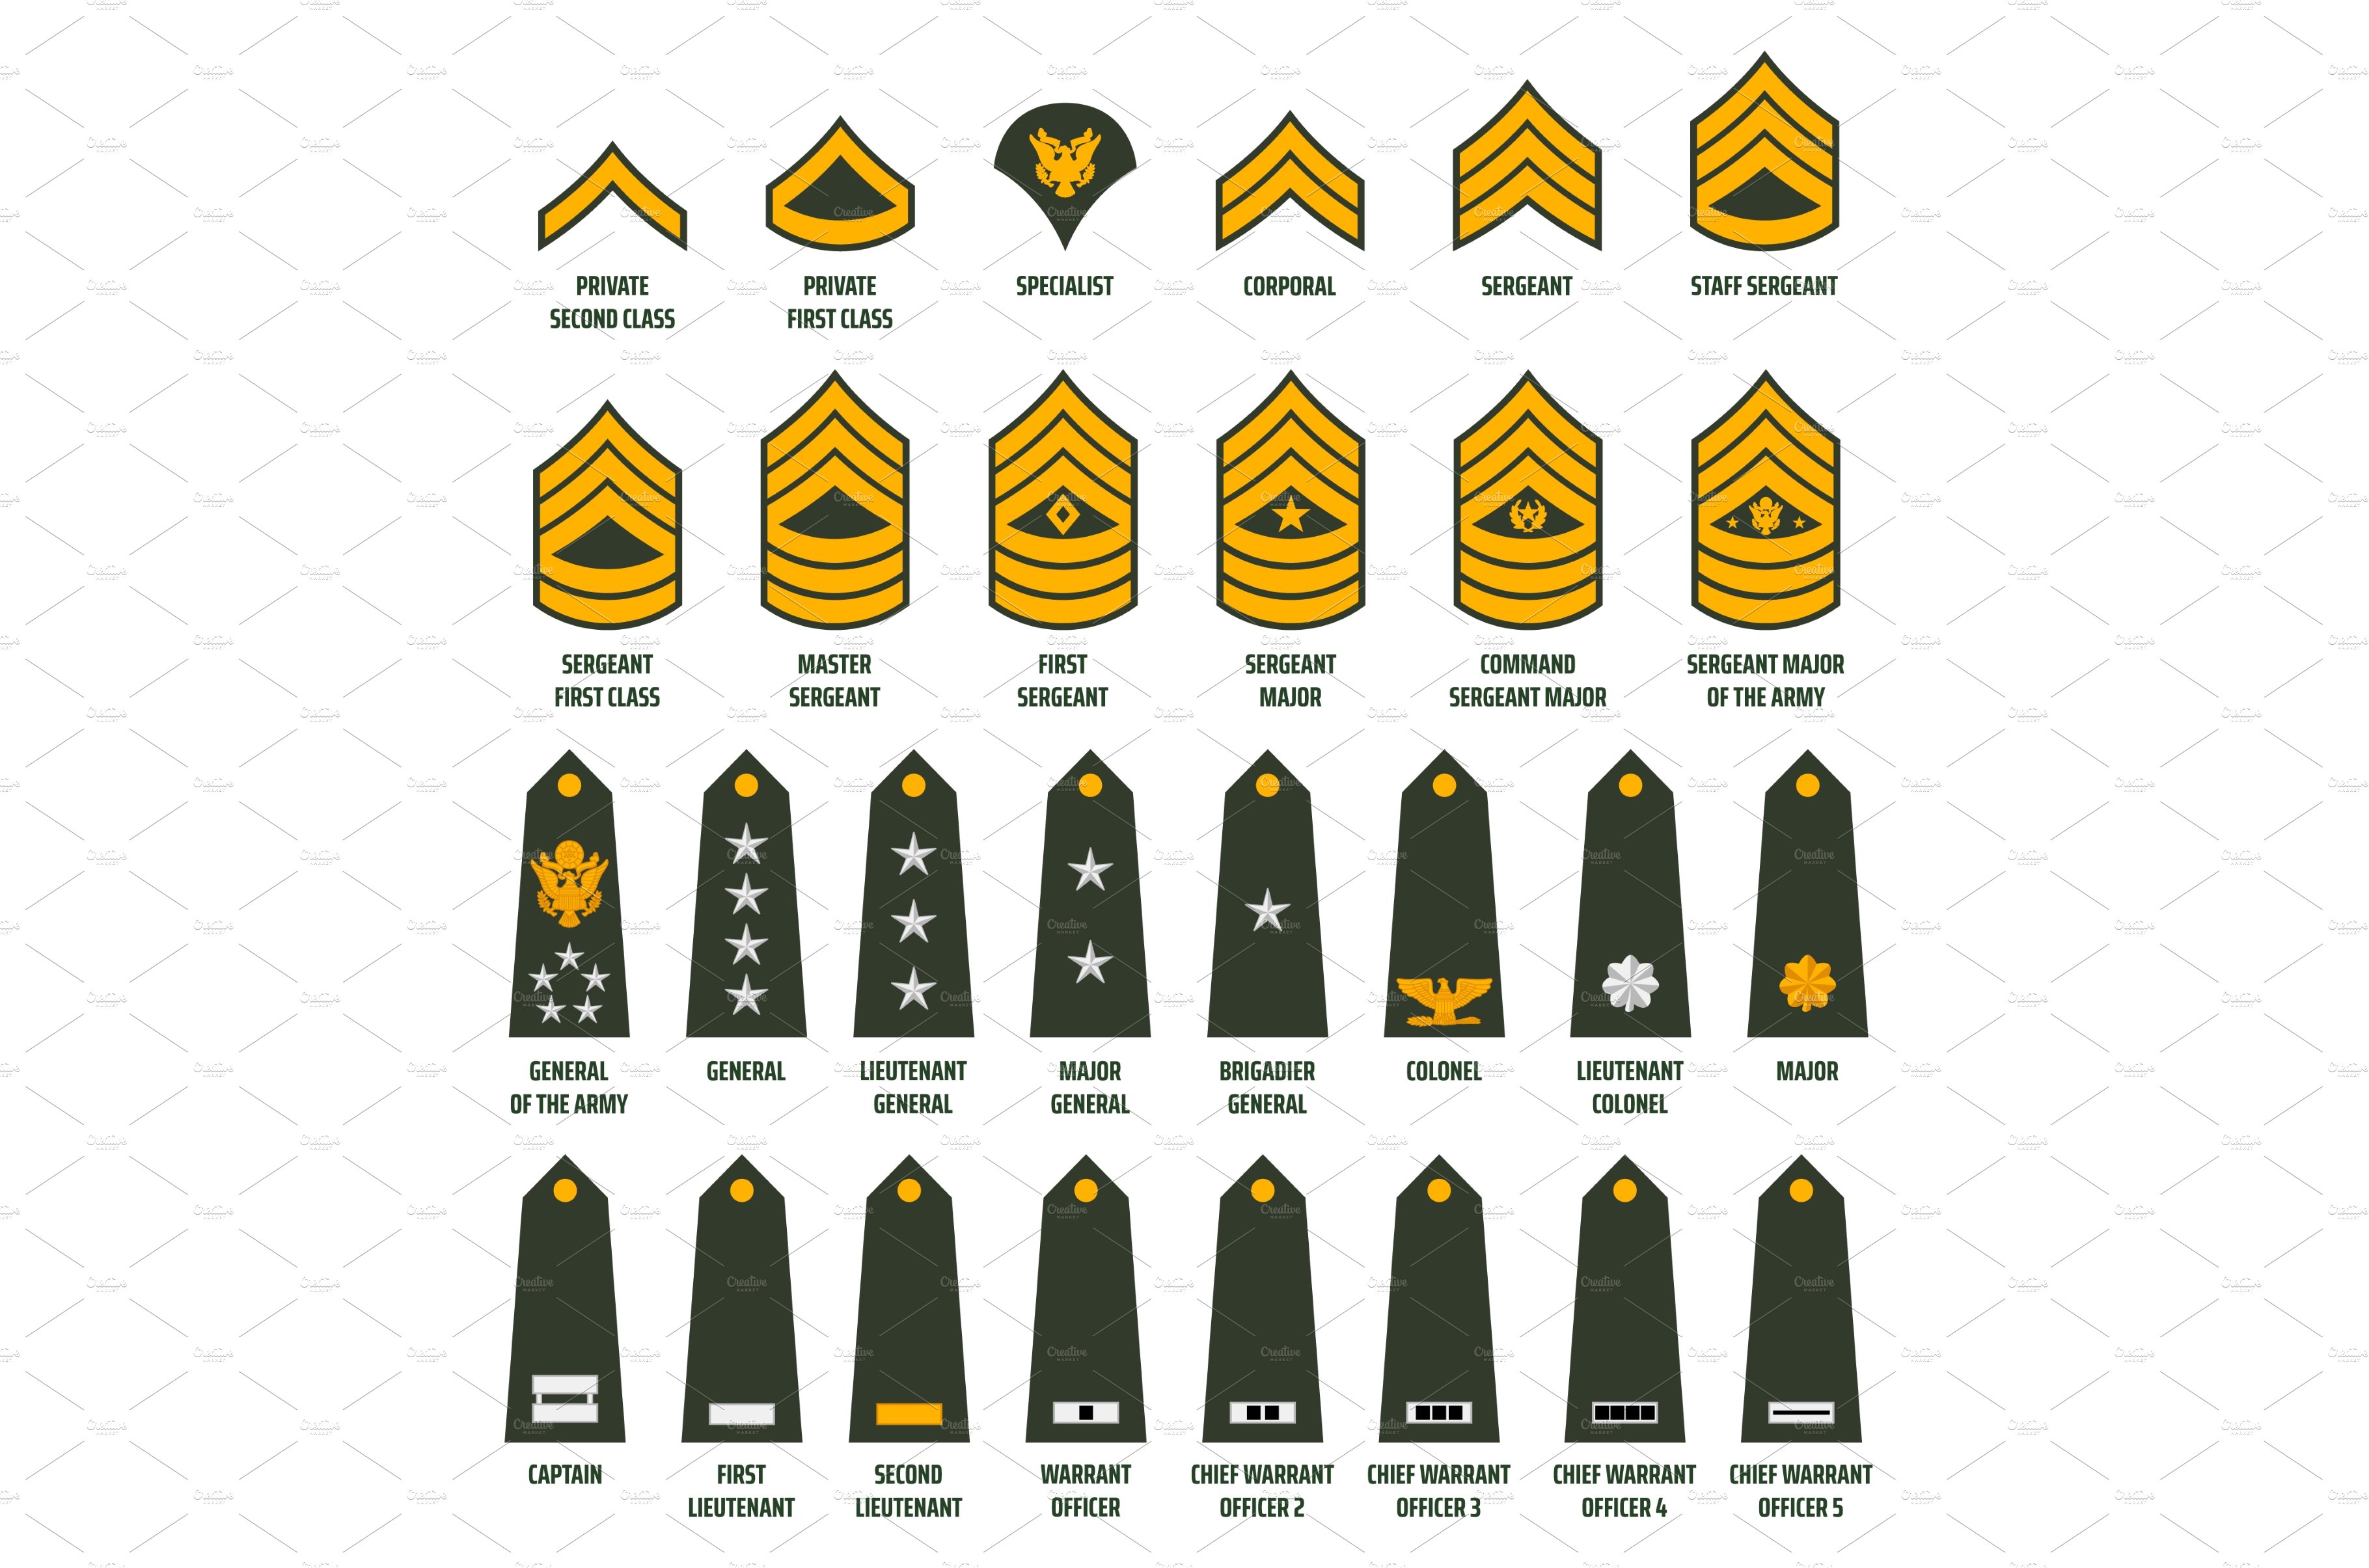 USA army enlisted ranks chevrons cover image.